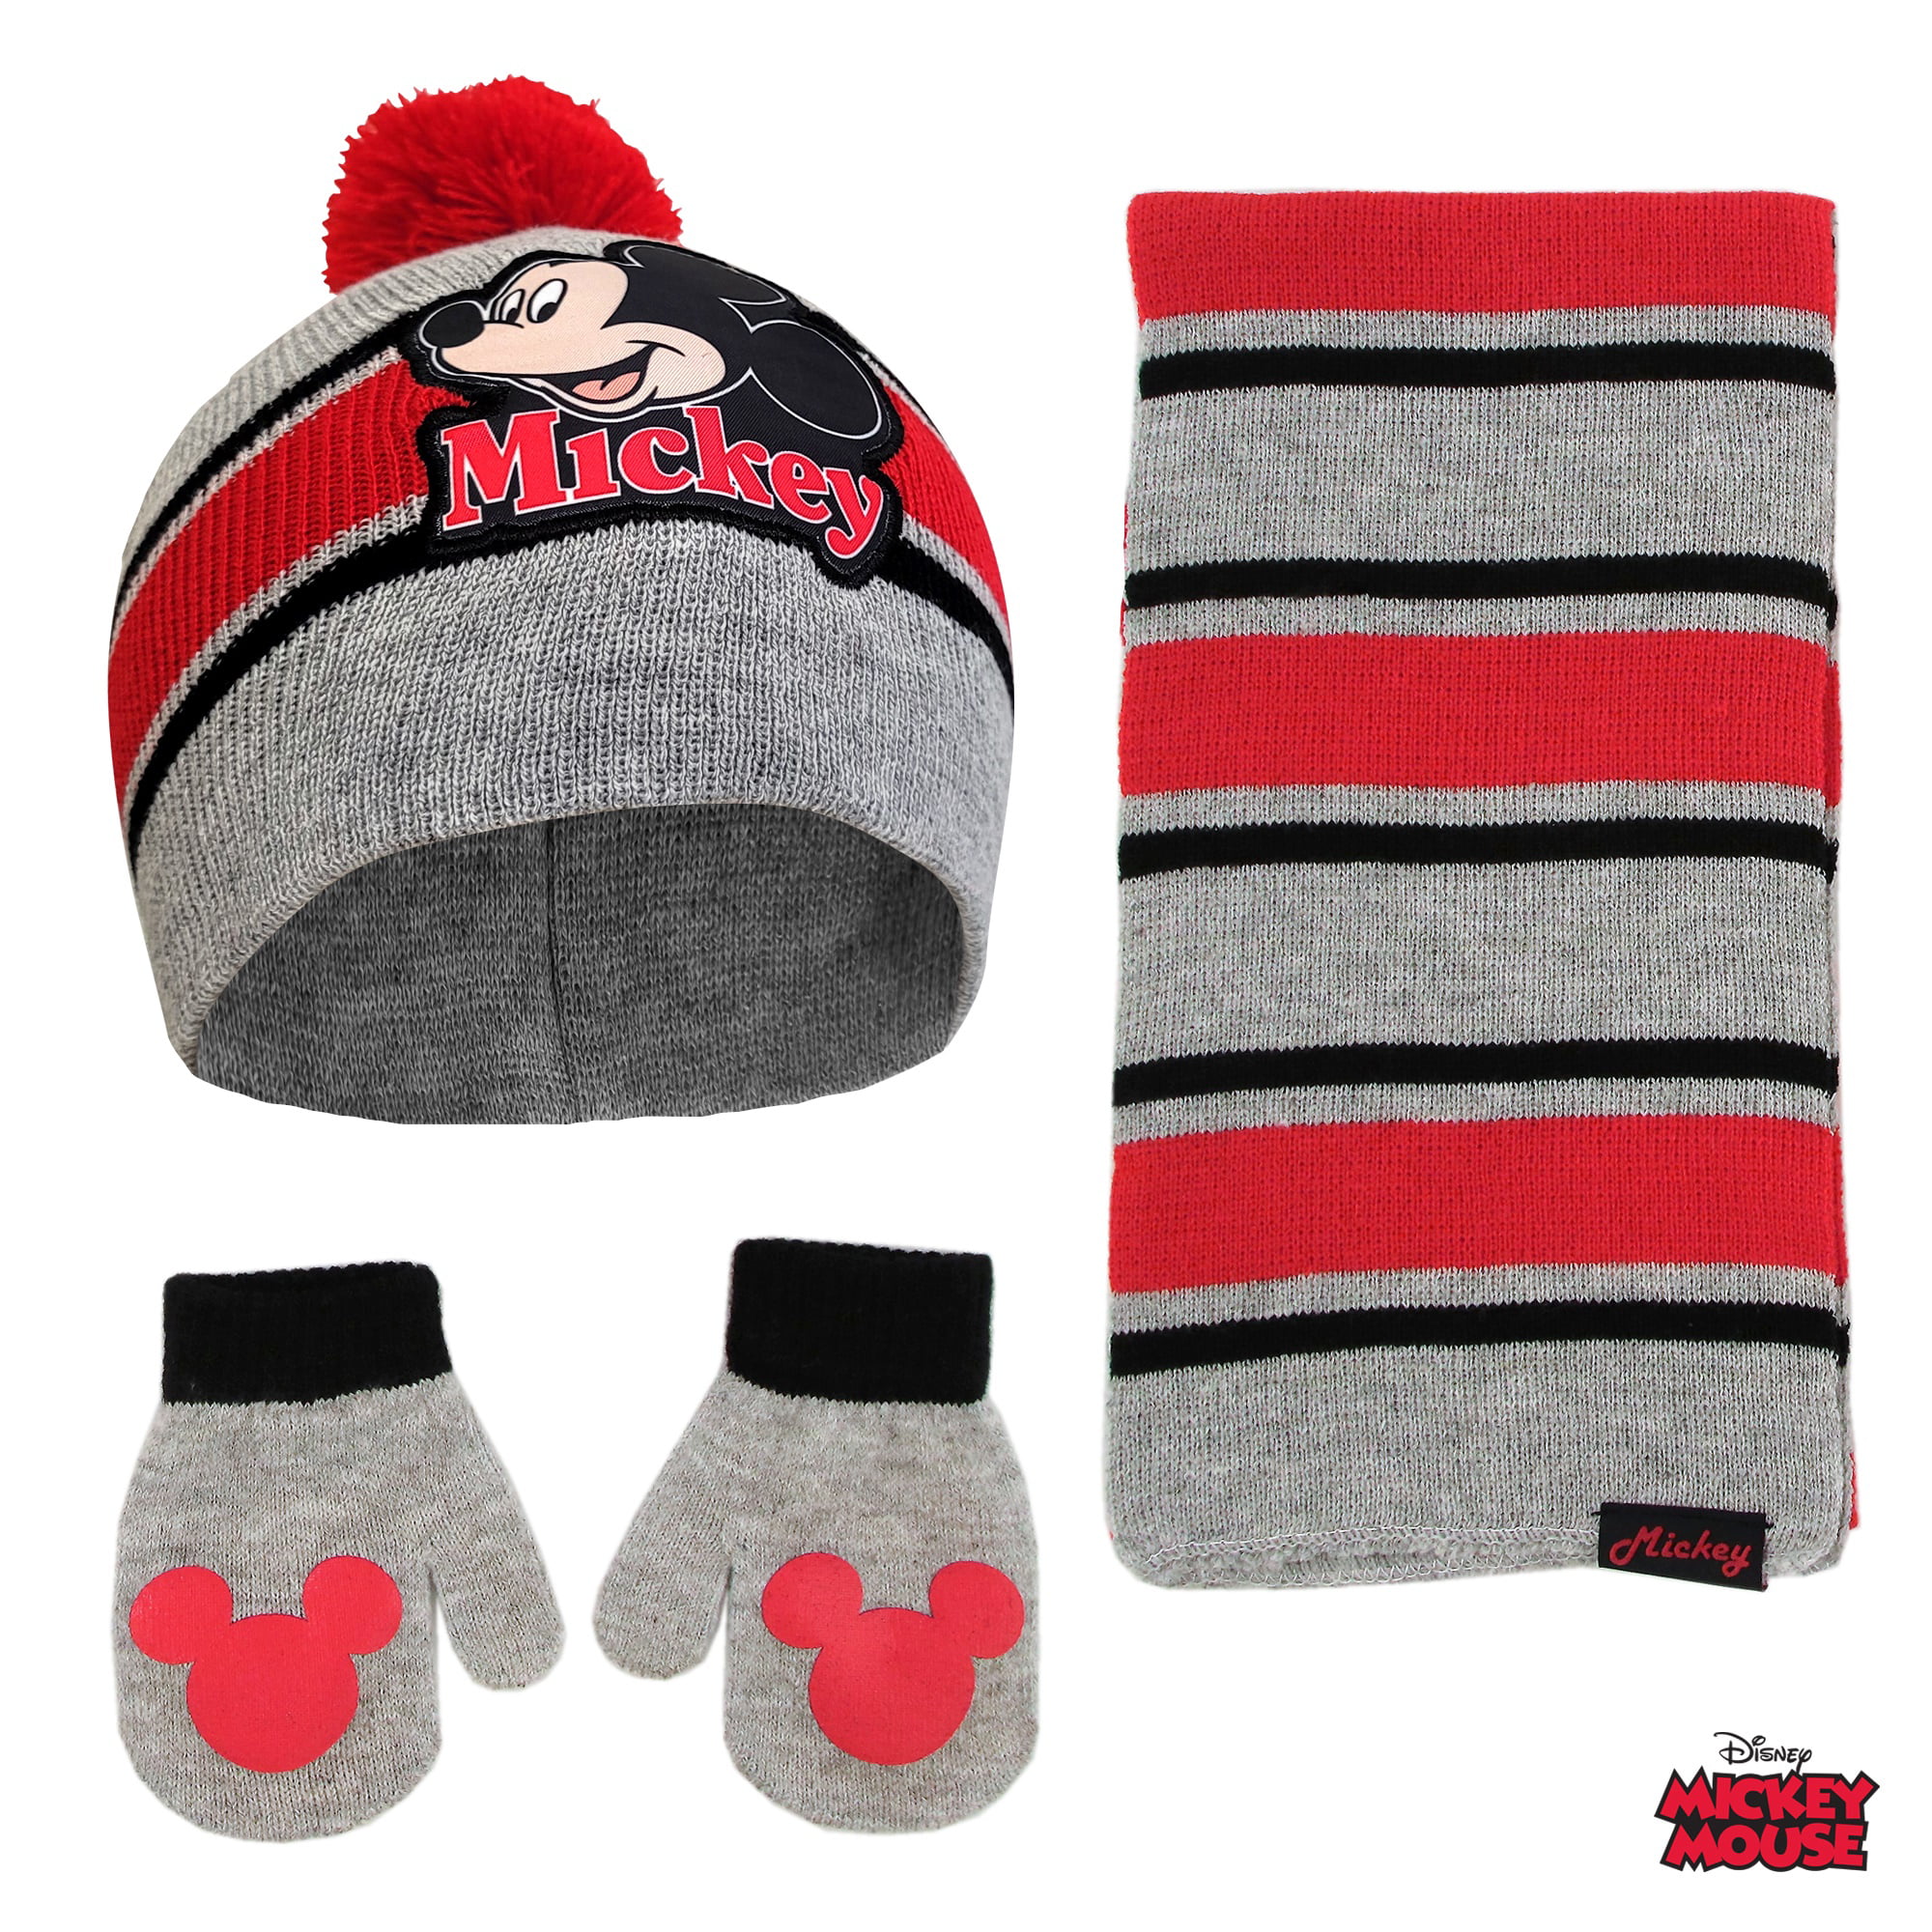 Micky Mouse Toddler Knit Beanie for Kids Age 2-4 Disney Boys Winter Hat and Mittens Set 